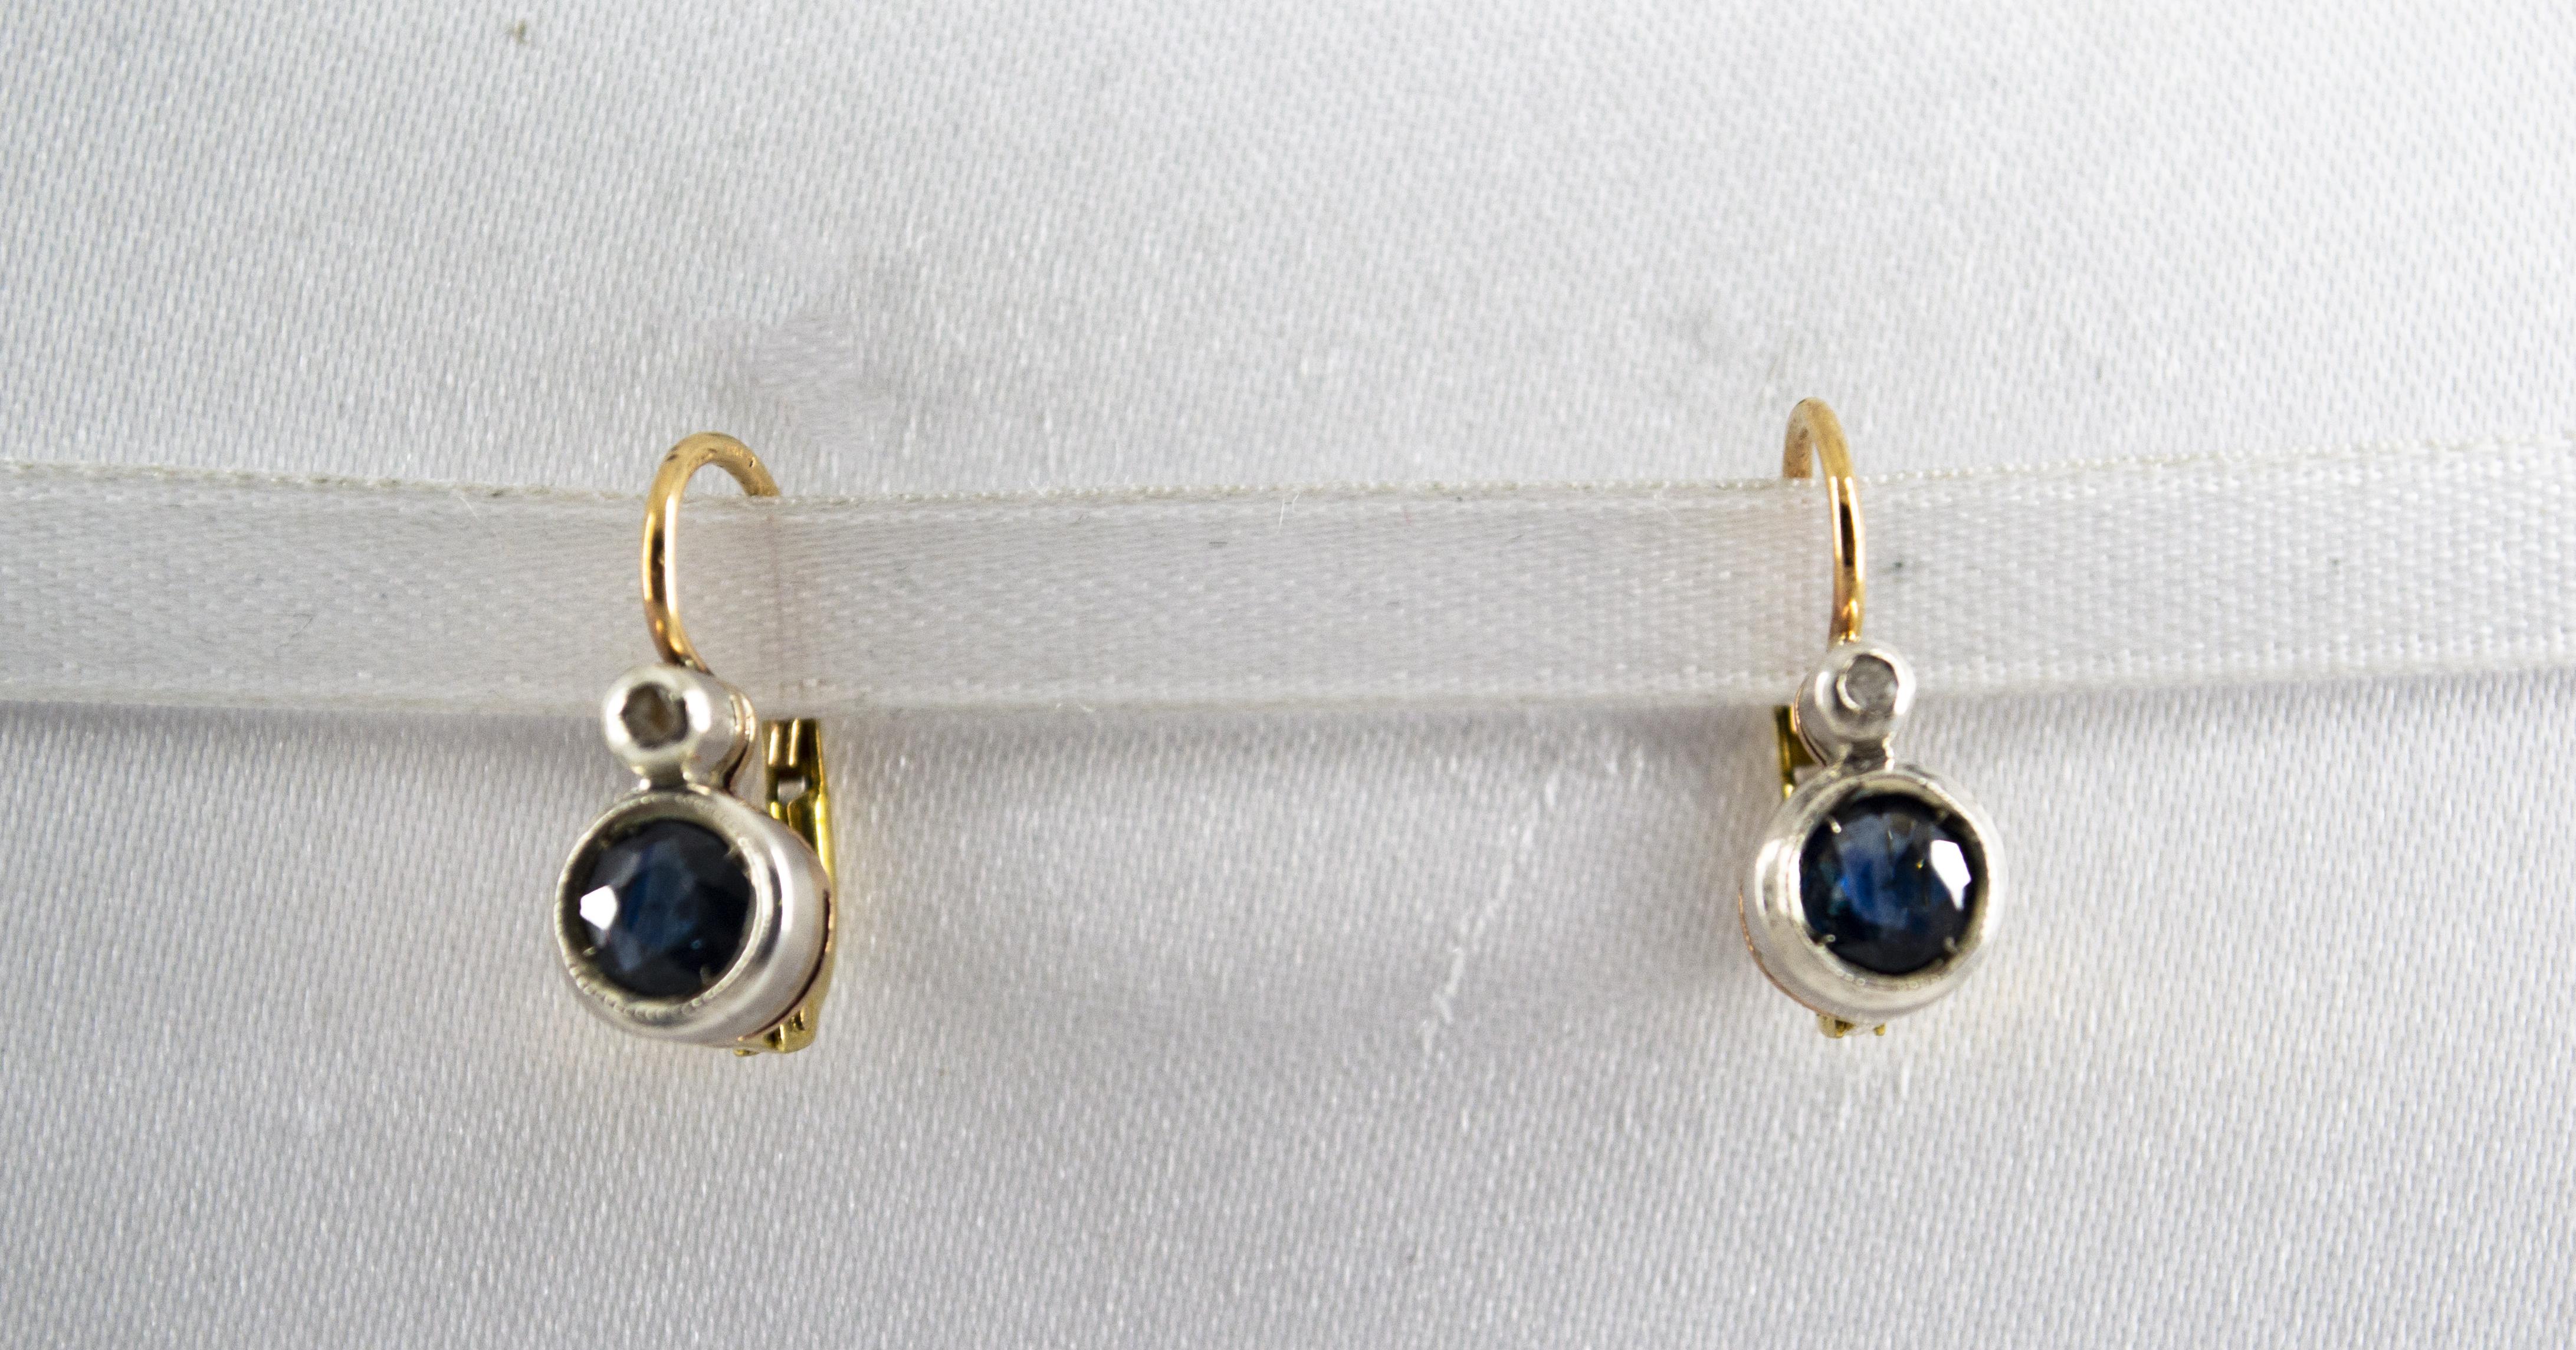 These Lever-Back Earrings are made of 9K Yellow Gold and Sterling Silver.
These Earrings have 0.02 Carats of White Diamonds.
These Earrings have also 1.00 Carat of Blue Sapphires.
These Earrings are available also with Ruby or Emerald.
All our